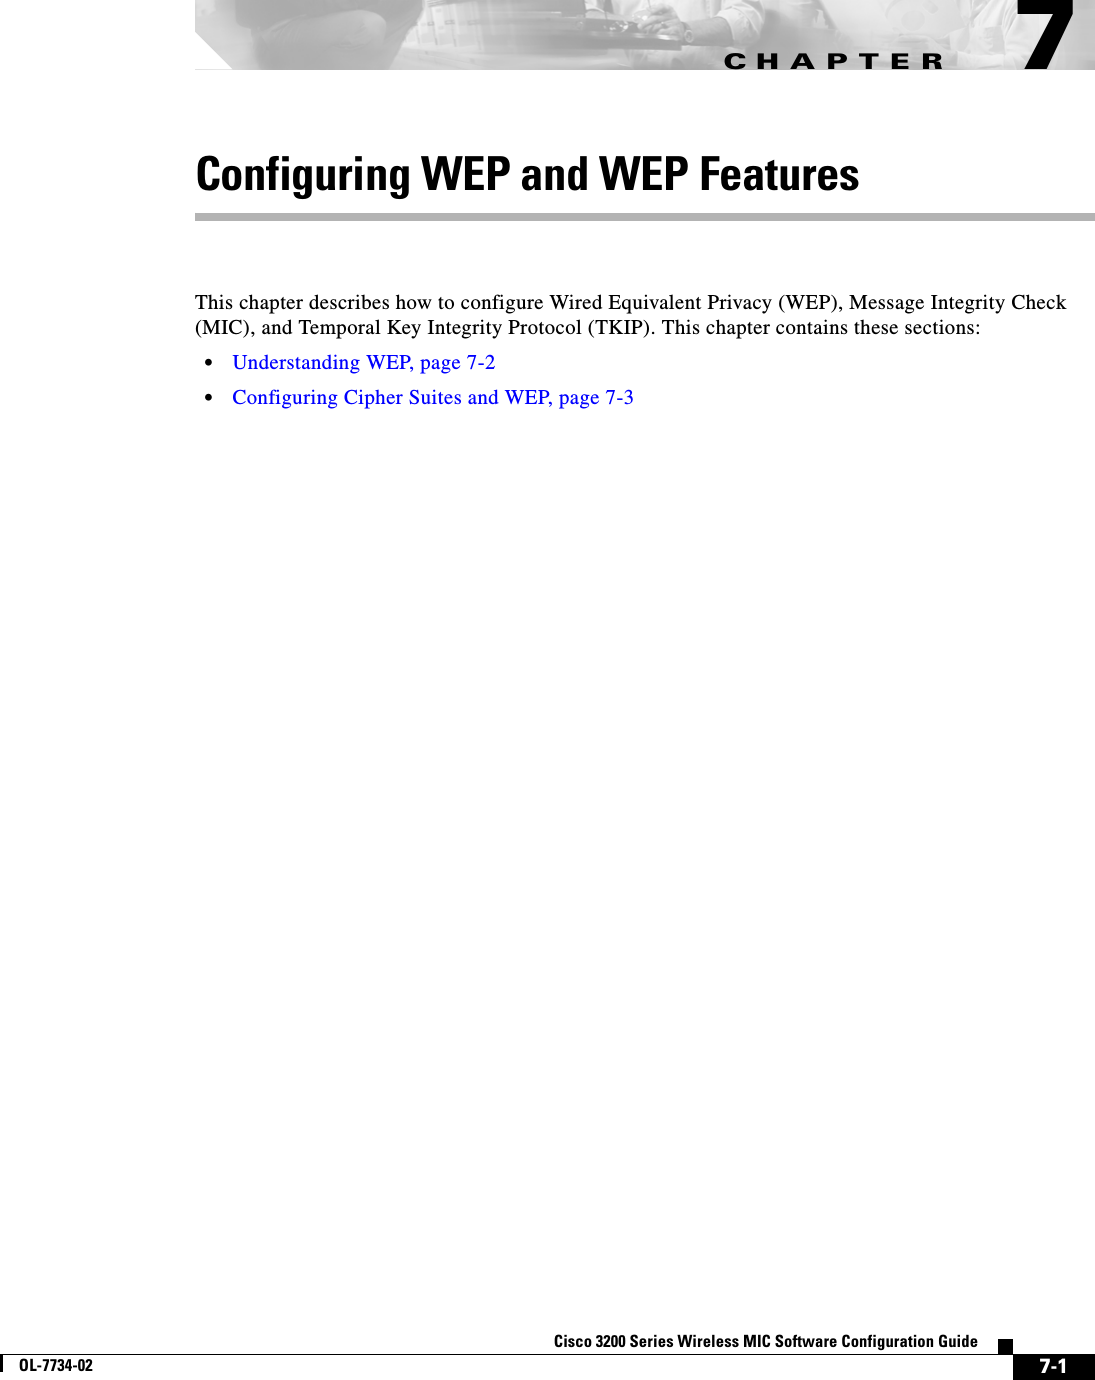 CHAPTER7-1Cisco 3200 Series Wireless MIC Software Configuration GuideOL-7734-027Configuring WEP and WEP FeaturesThis chapter describes how to configure Wired Equivalent Privacy (WEP), Message Integrity Check (MIC), and Temporal Key Integrity Protocol (TKIP). This chapter contains these sections:•Understanding WEP, page 7-2•Configuring Cipher Suites and WEP, page 7-3